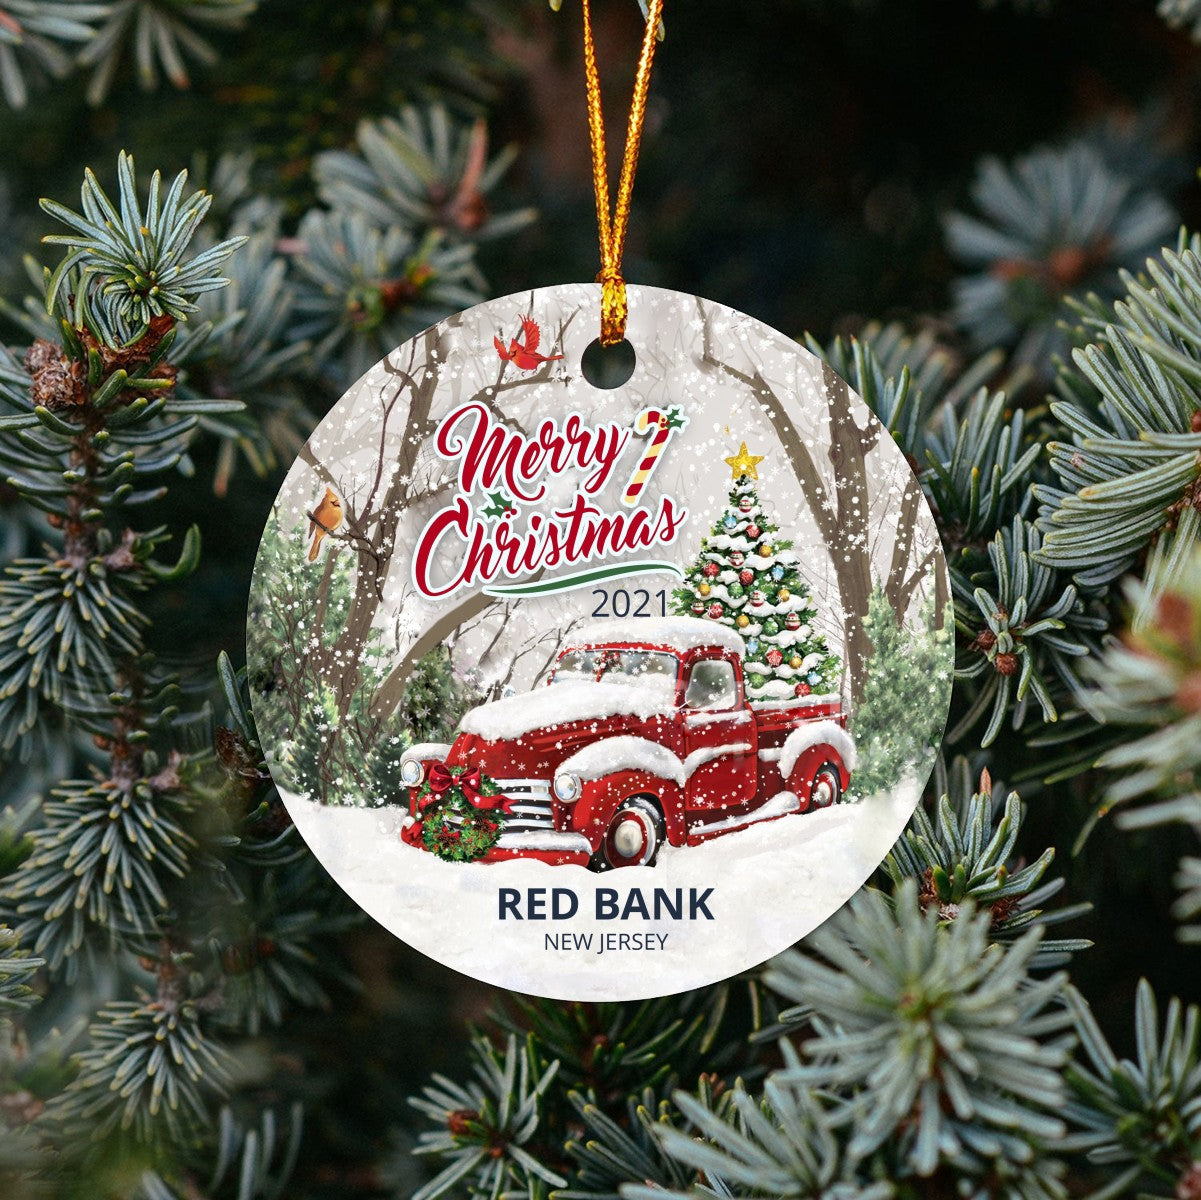 Christmas Tree Ornaments Red Bank - Ornament With Name City, State Red Bank New Jersey NJ Ornament - Red Truck Xmas Ornaments 3'' Plastic Gift For Family, Friend And Housewarming